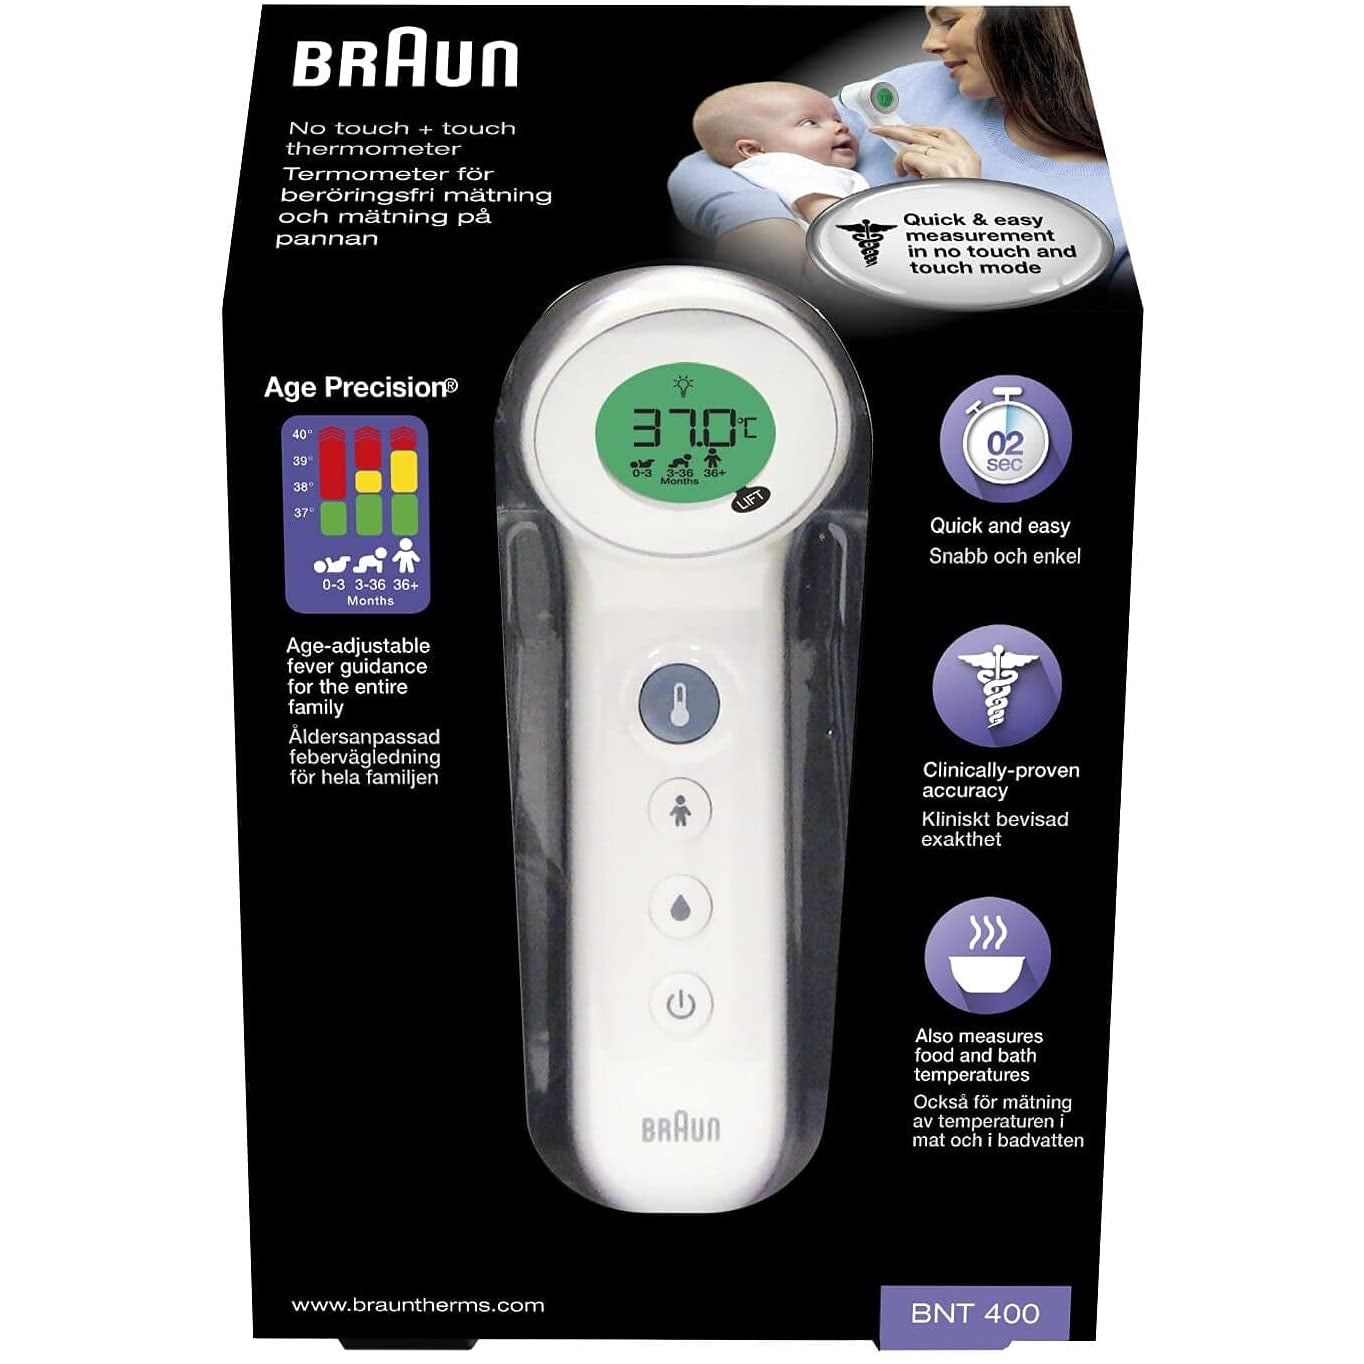 Braun No Touch + Touch thermometer with Age Precision